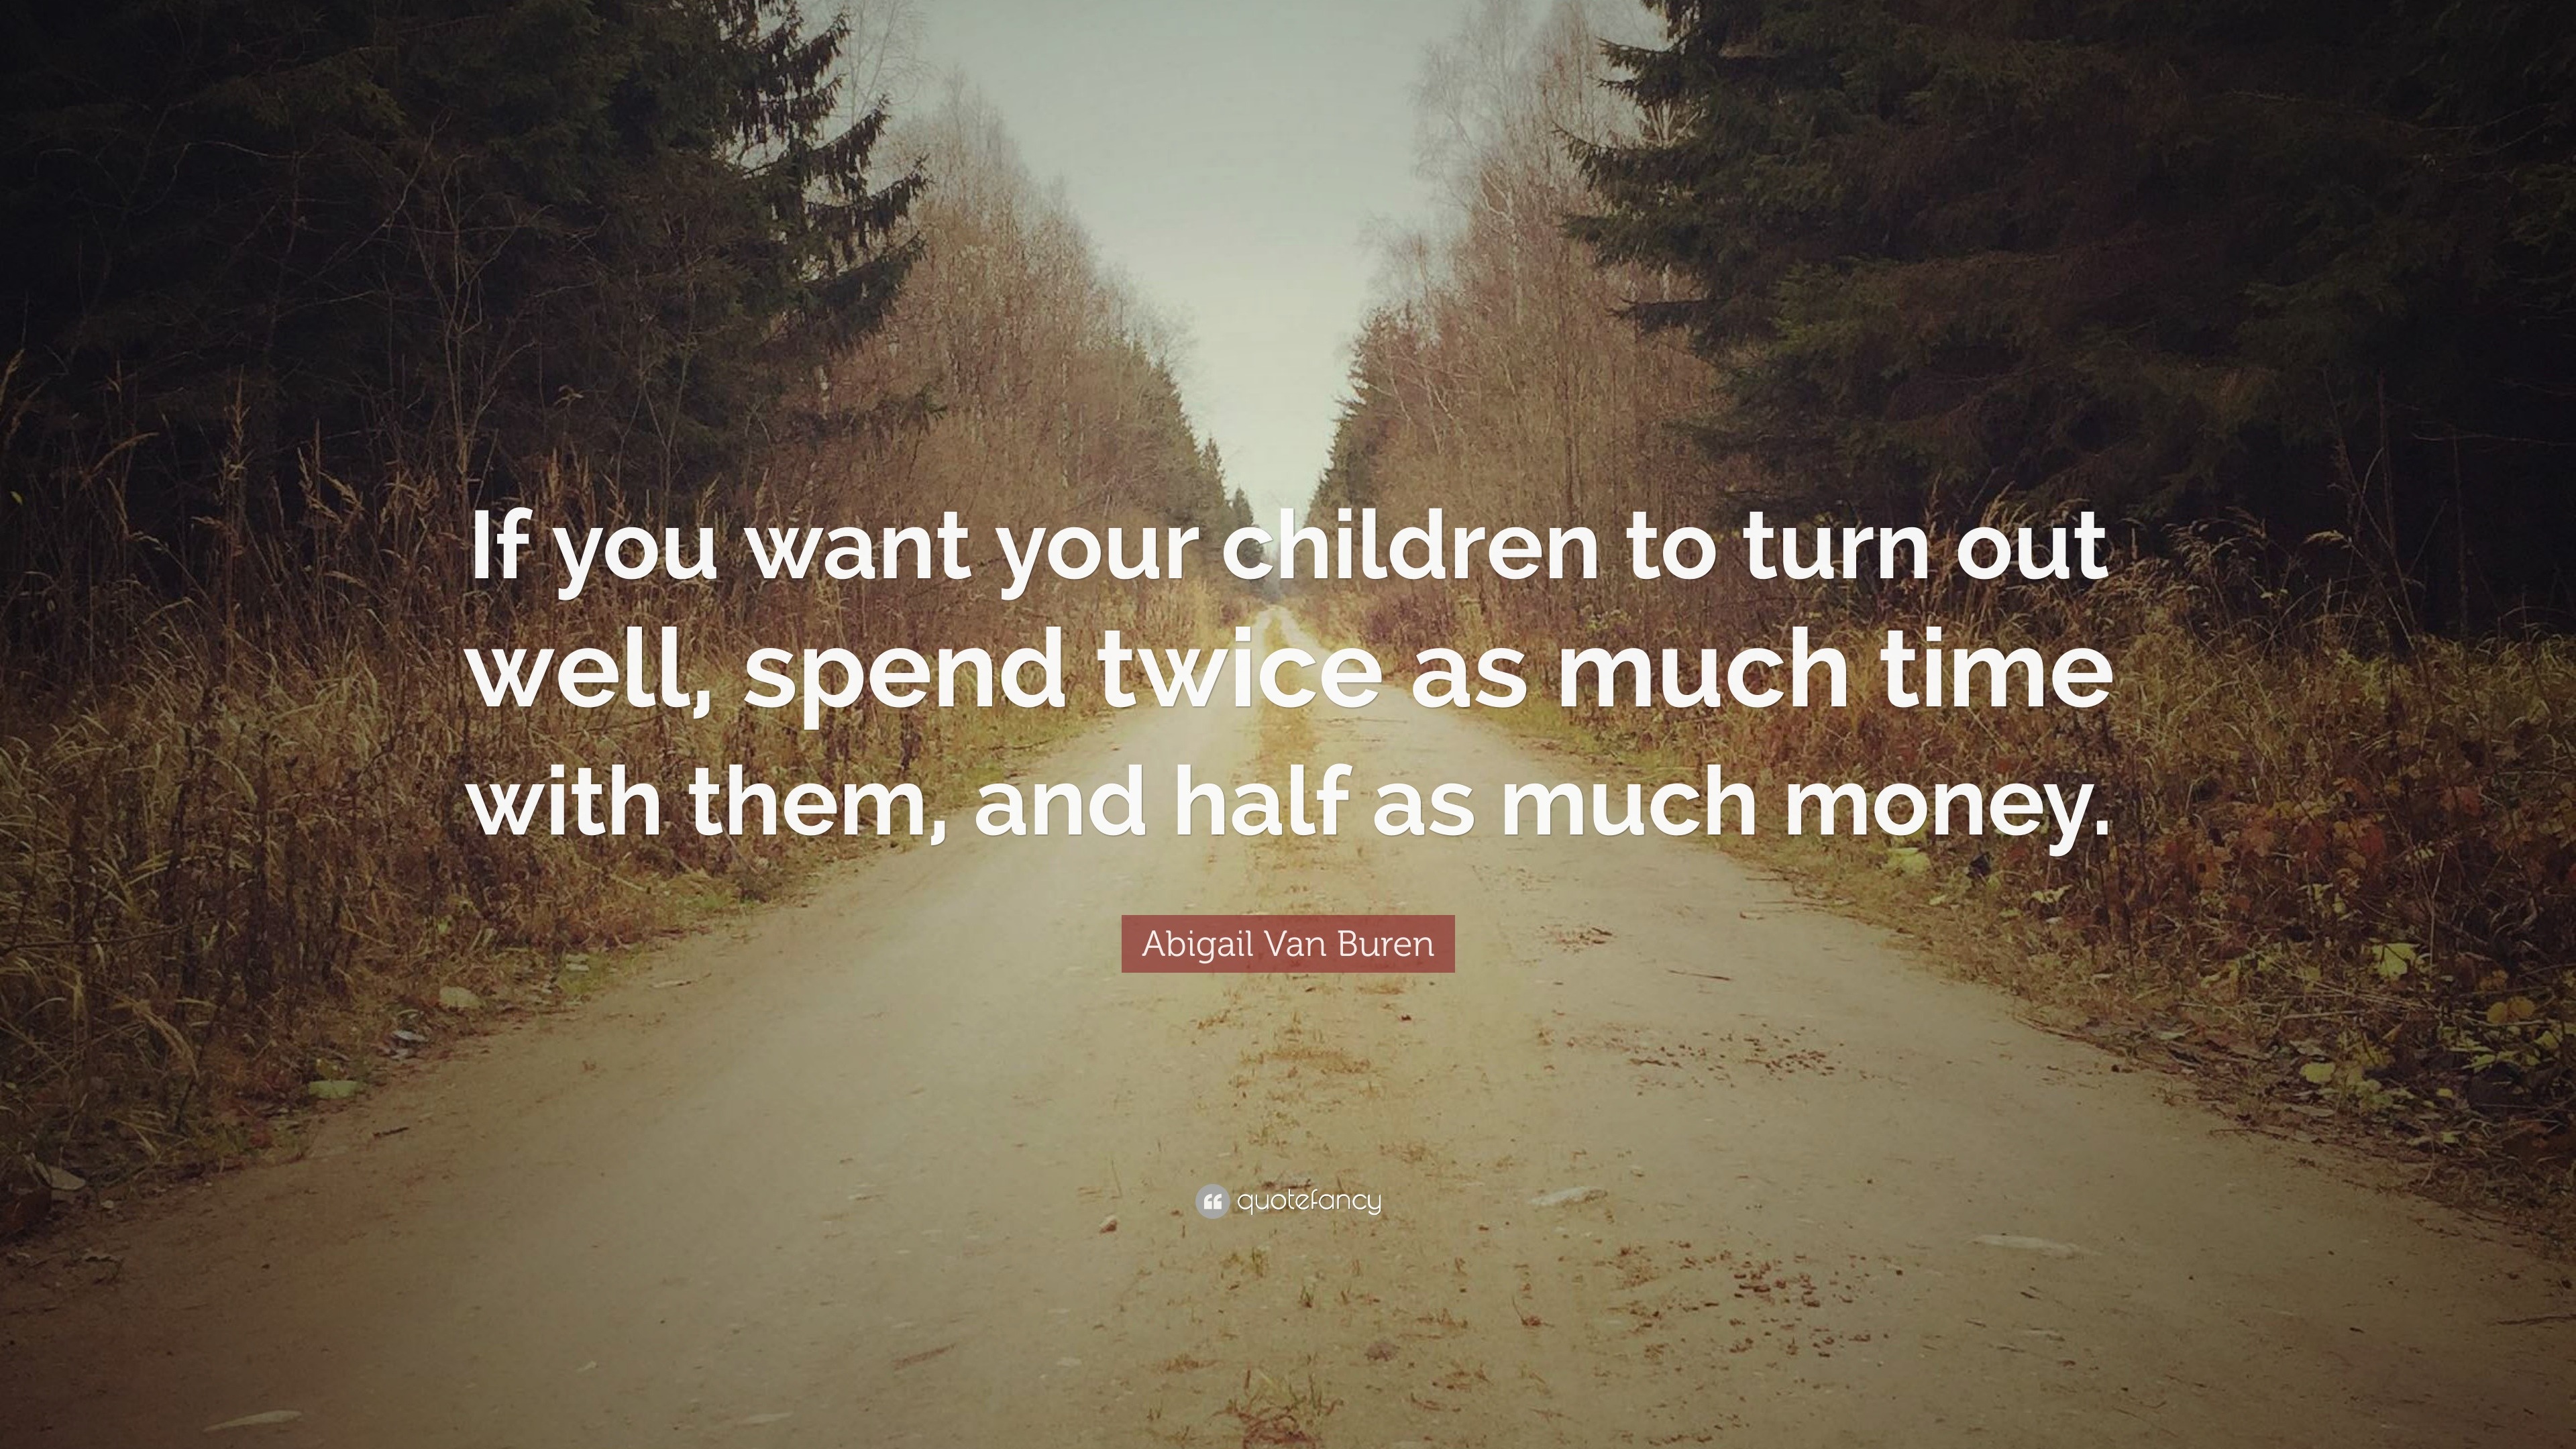 Abigail Van Buren Quote: “If you want your children to turn out well ...